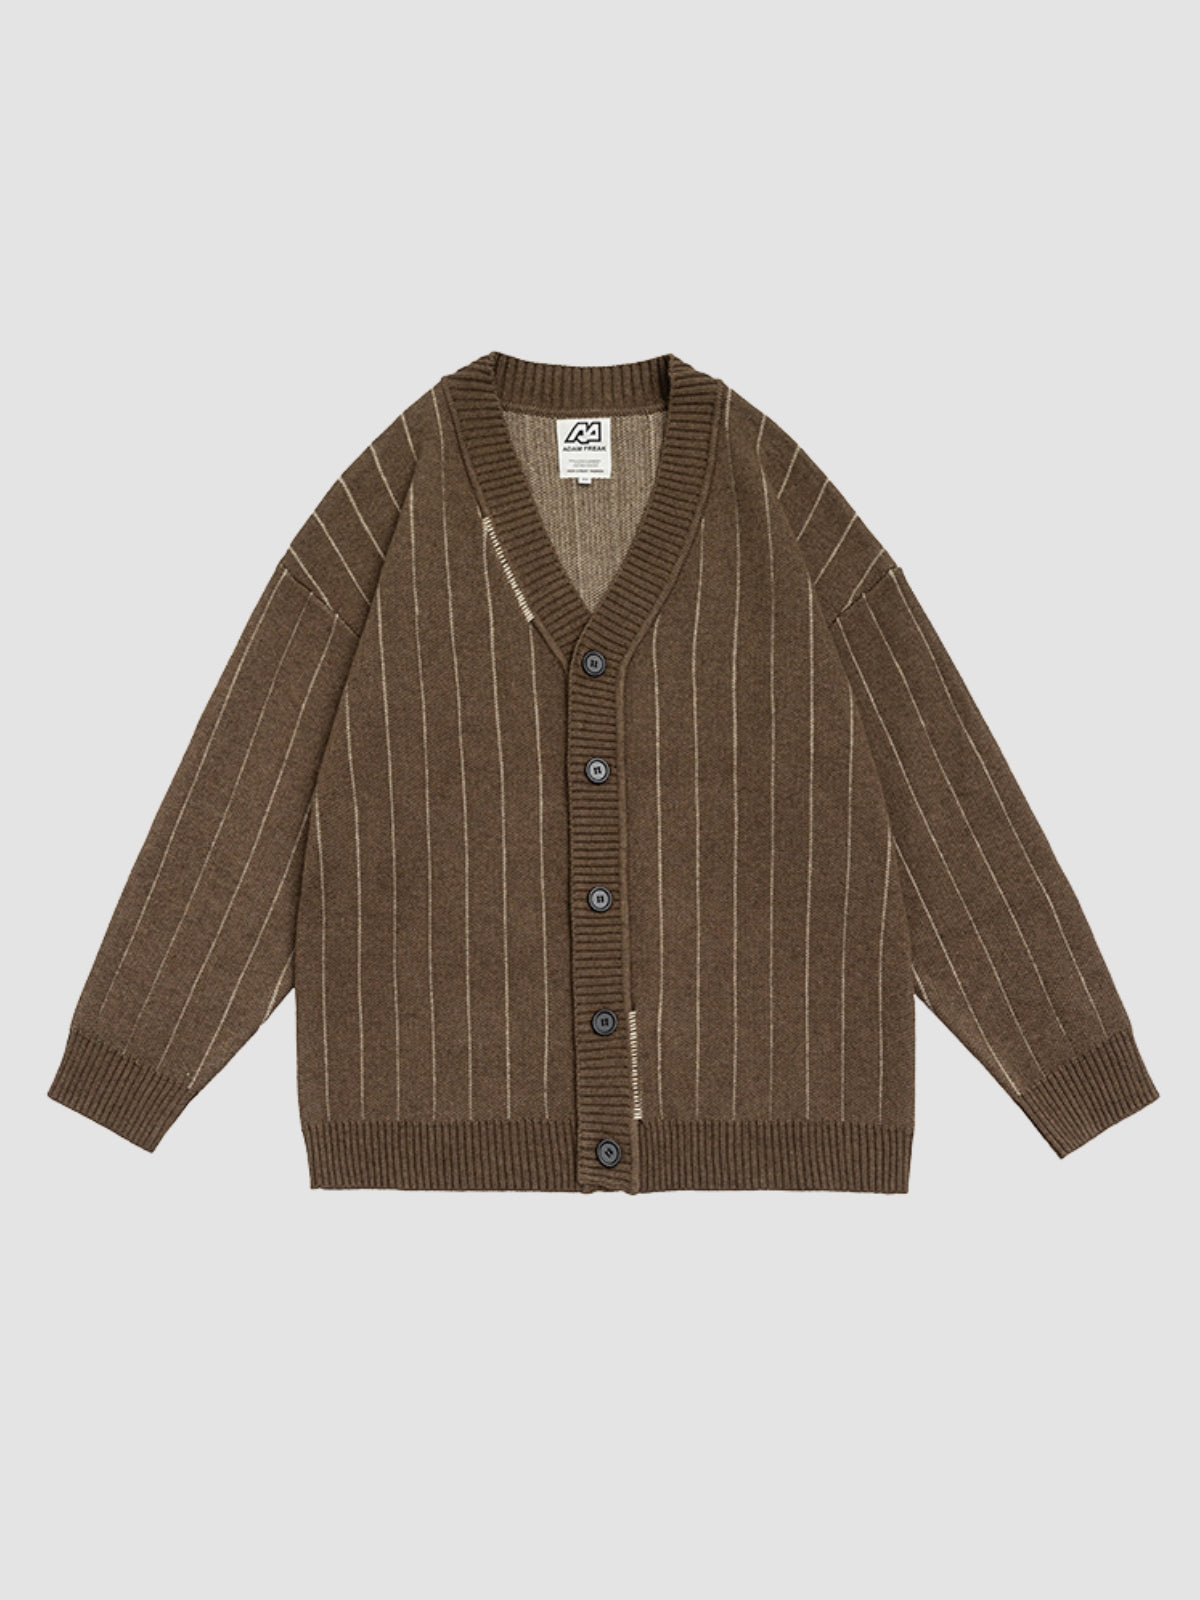 WLS Striped Retro Knitted Cardigan